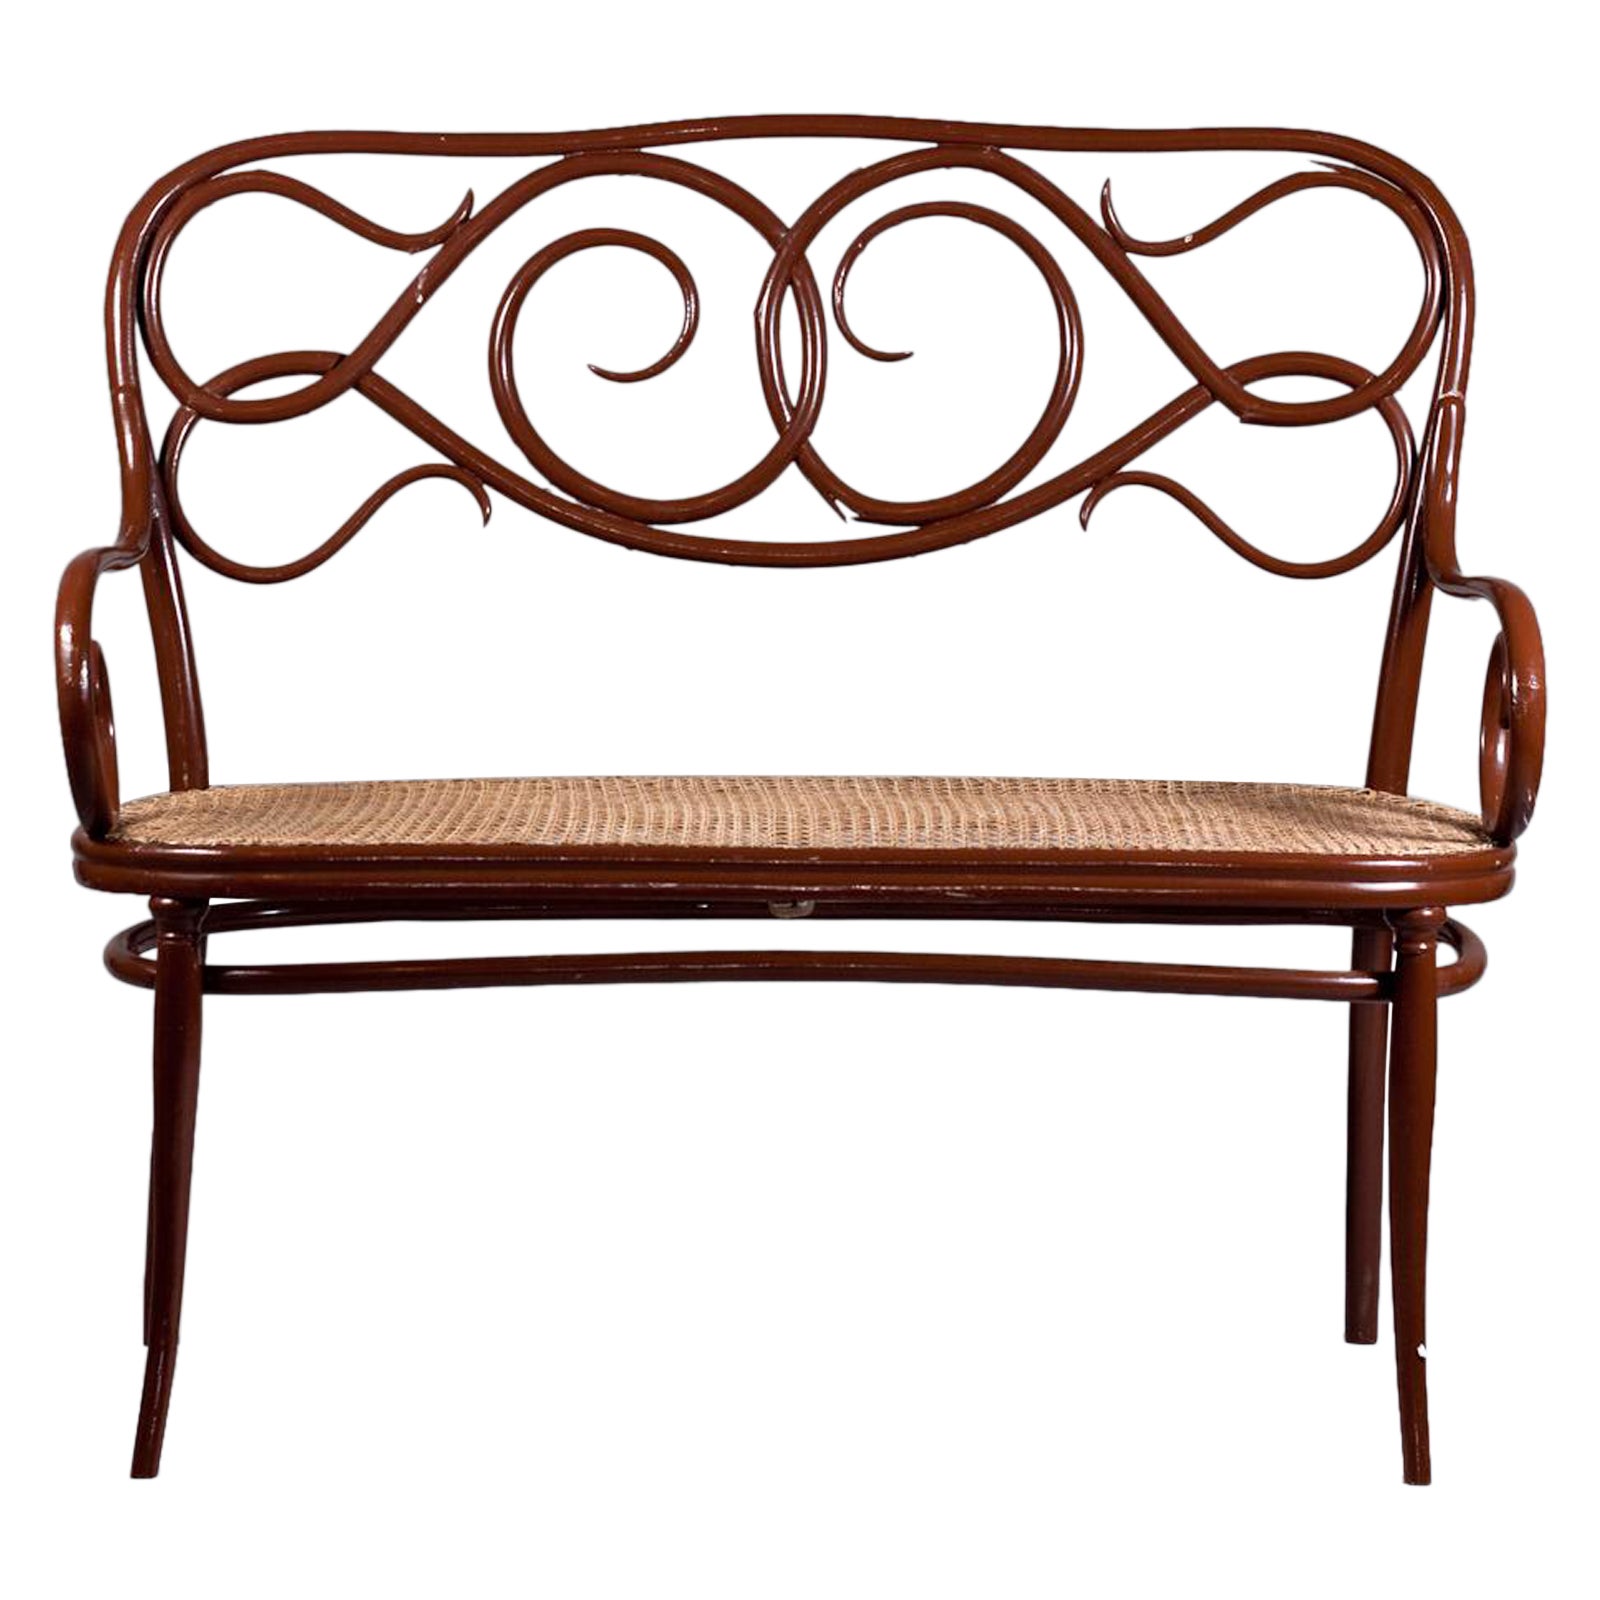 Antique Thonet No. 2 Bentwood Sofa , late 19th century For Sale